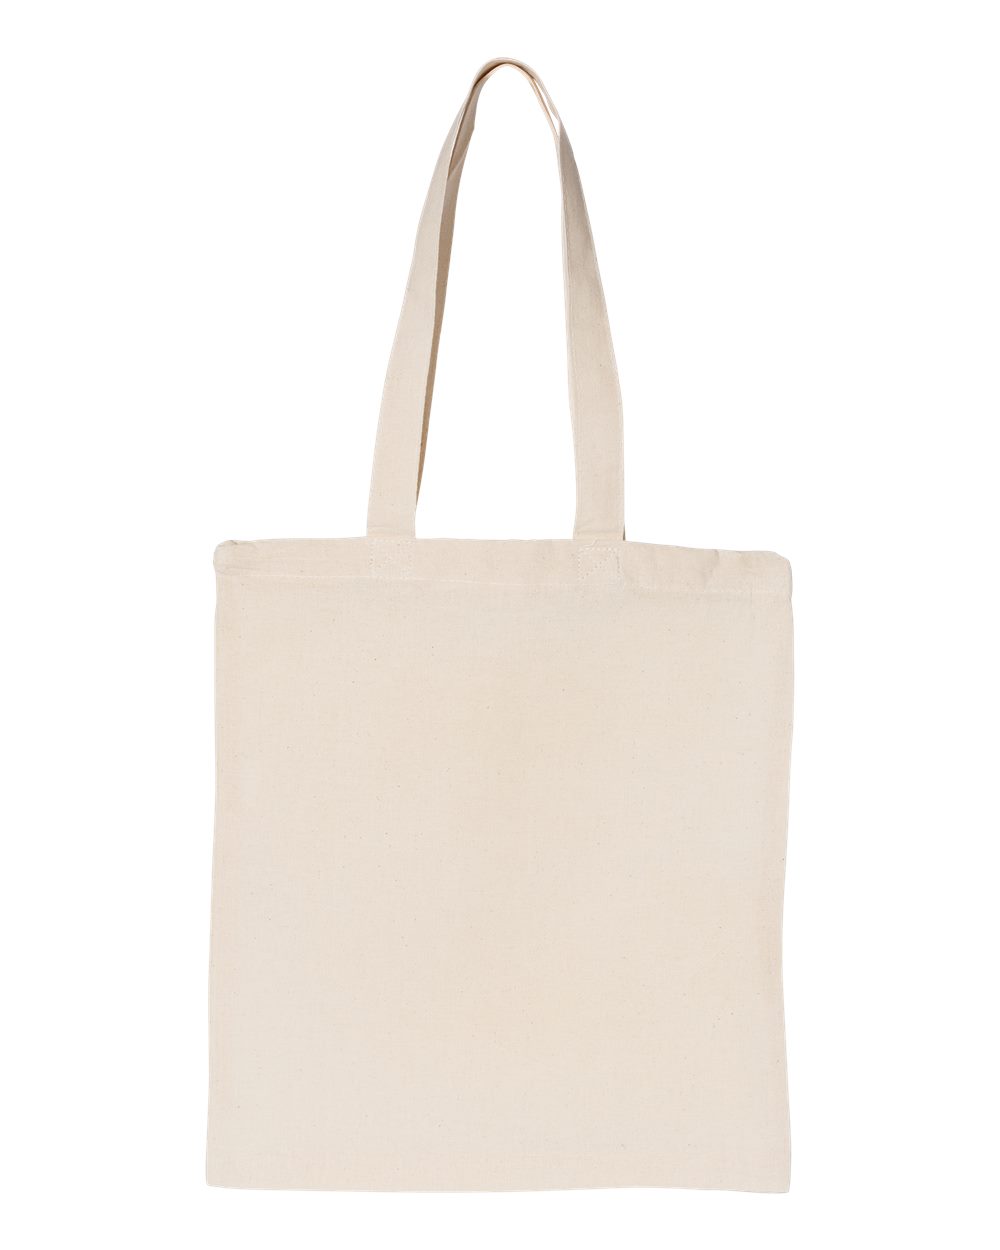 4 Pack OAD Large Canvas Shopper Tote Bag Beach Hand OAD117 11